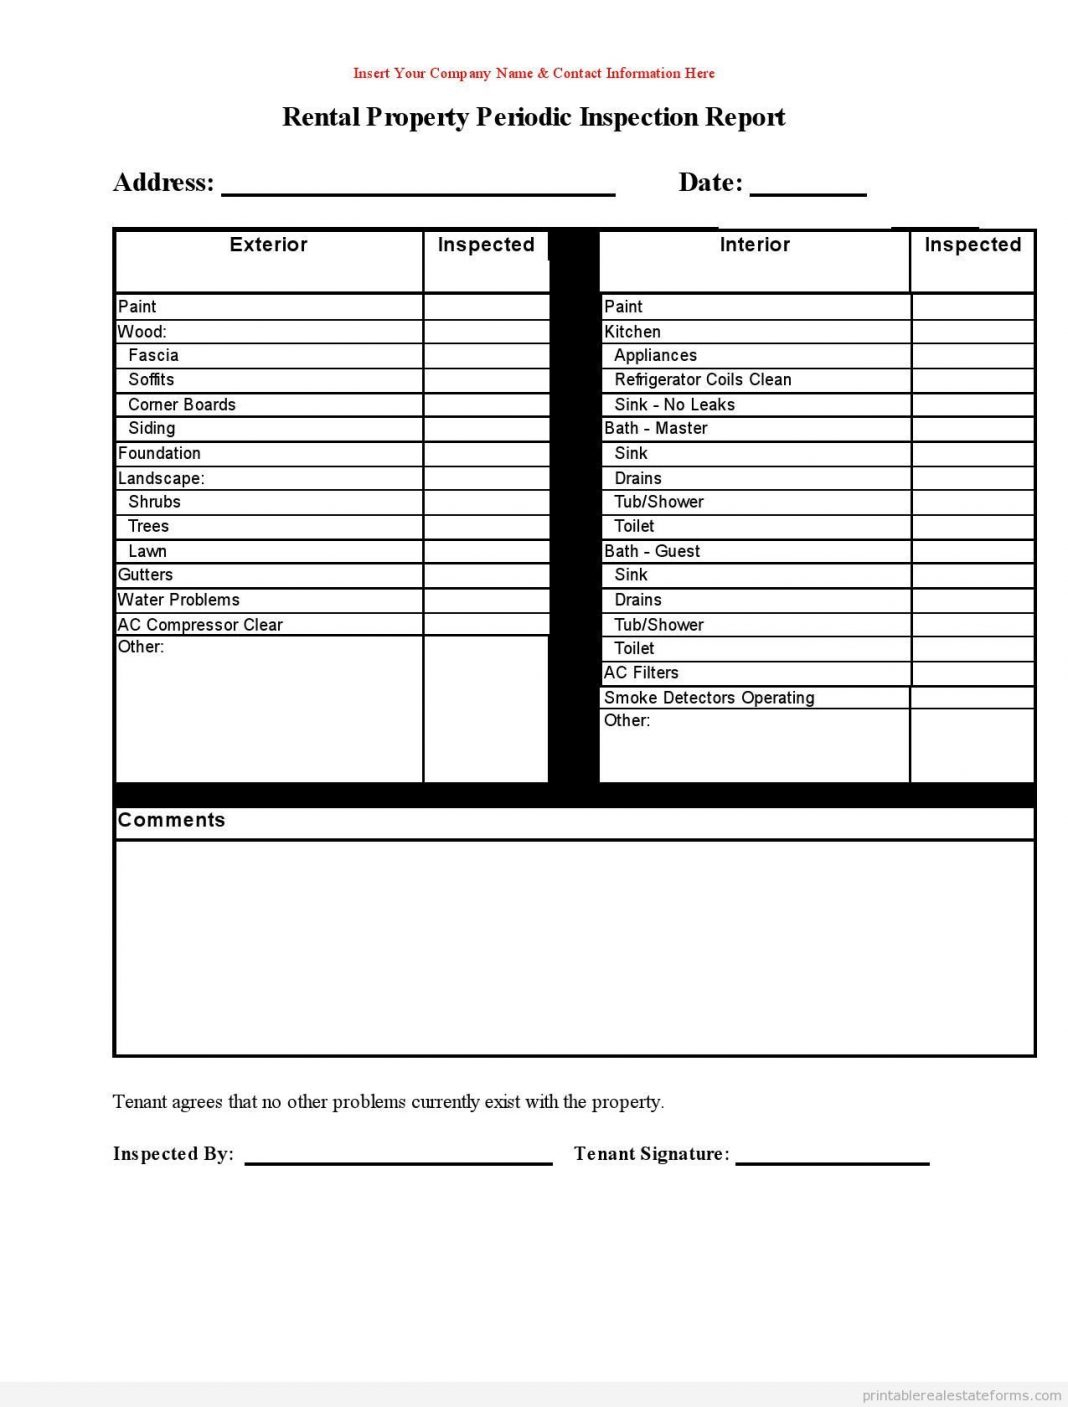 Inspection Rt Template Home Build Your Own Version Top Excel With Regard To Home Inspection Report Template Free